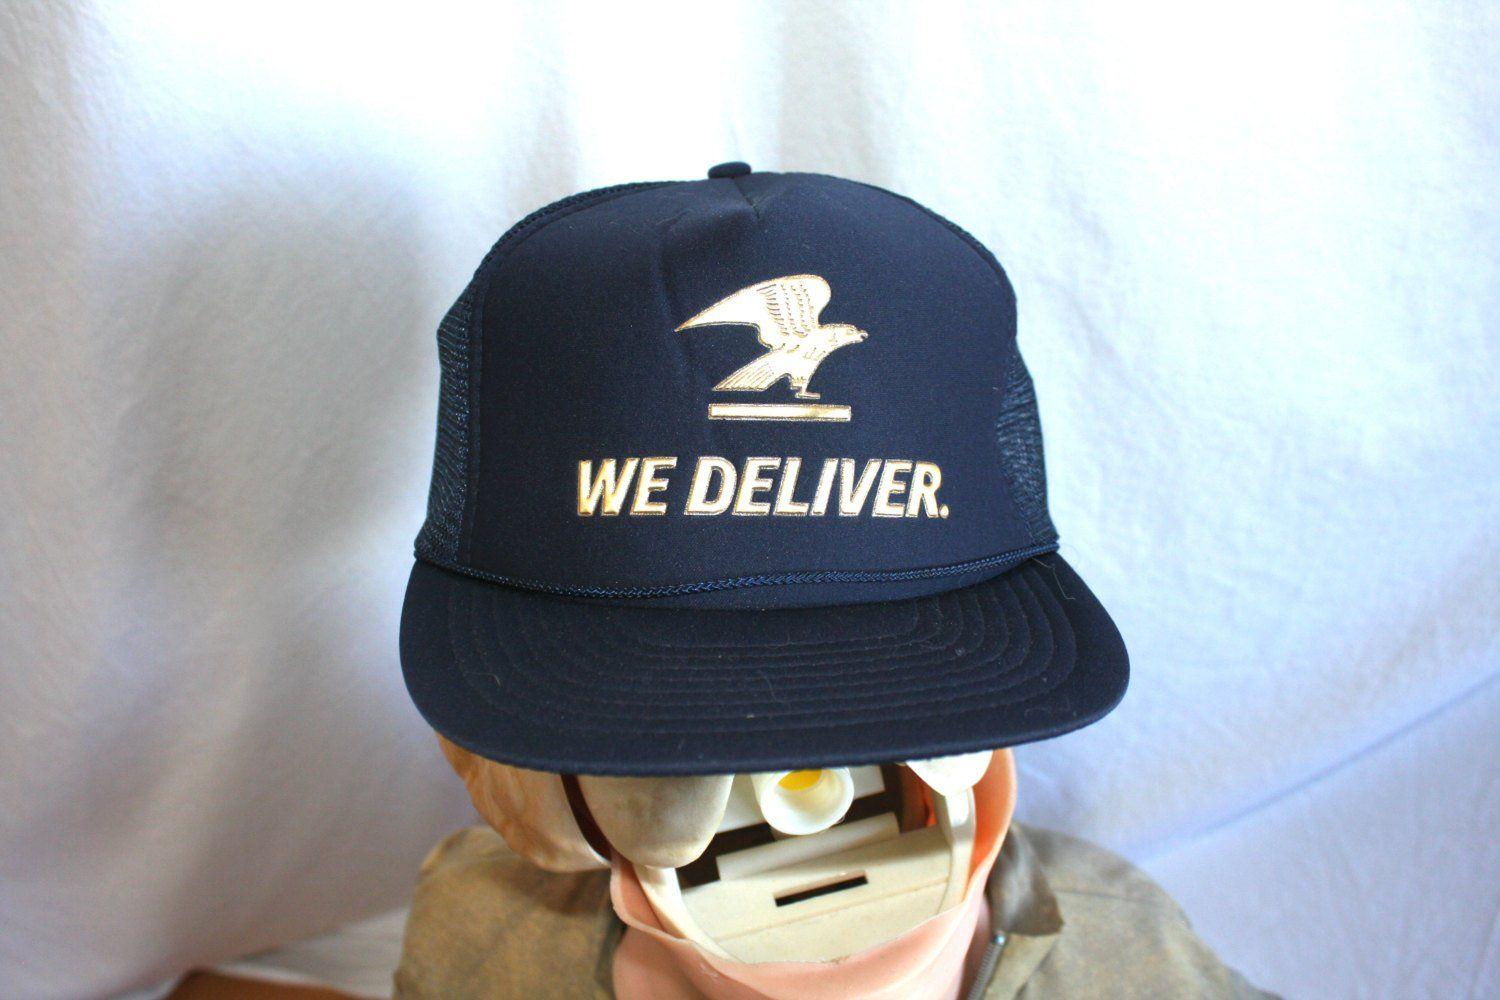 Post Office Blue Eagle Logo - We Deliver Post Office Truckers Cap. Mesh Baseball Snapback Cap With ...